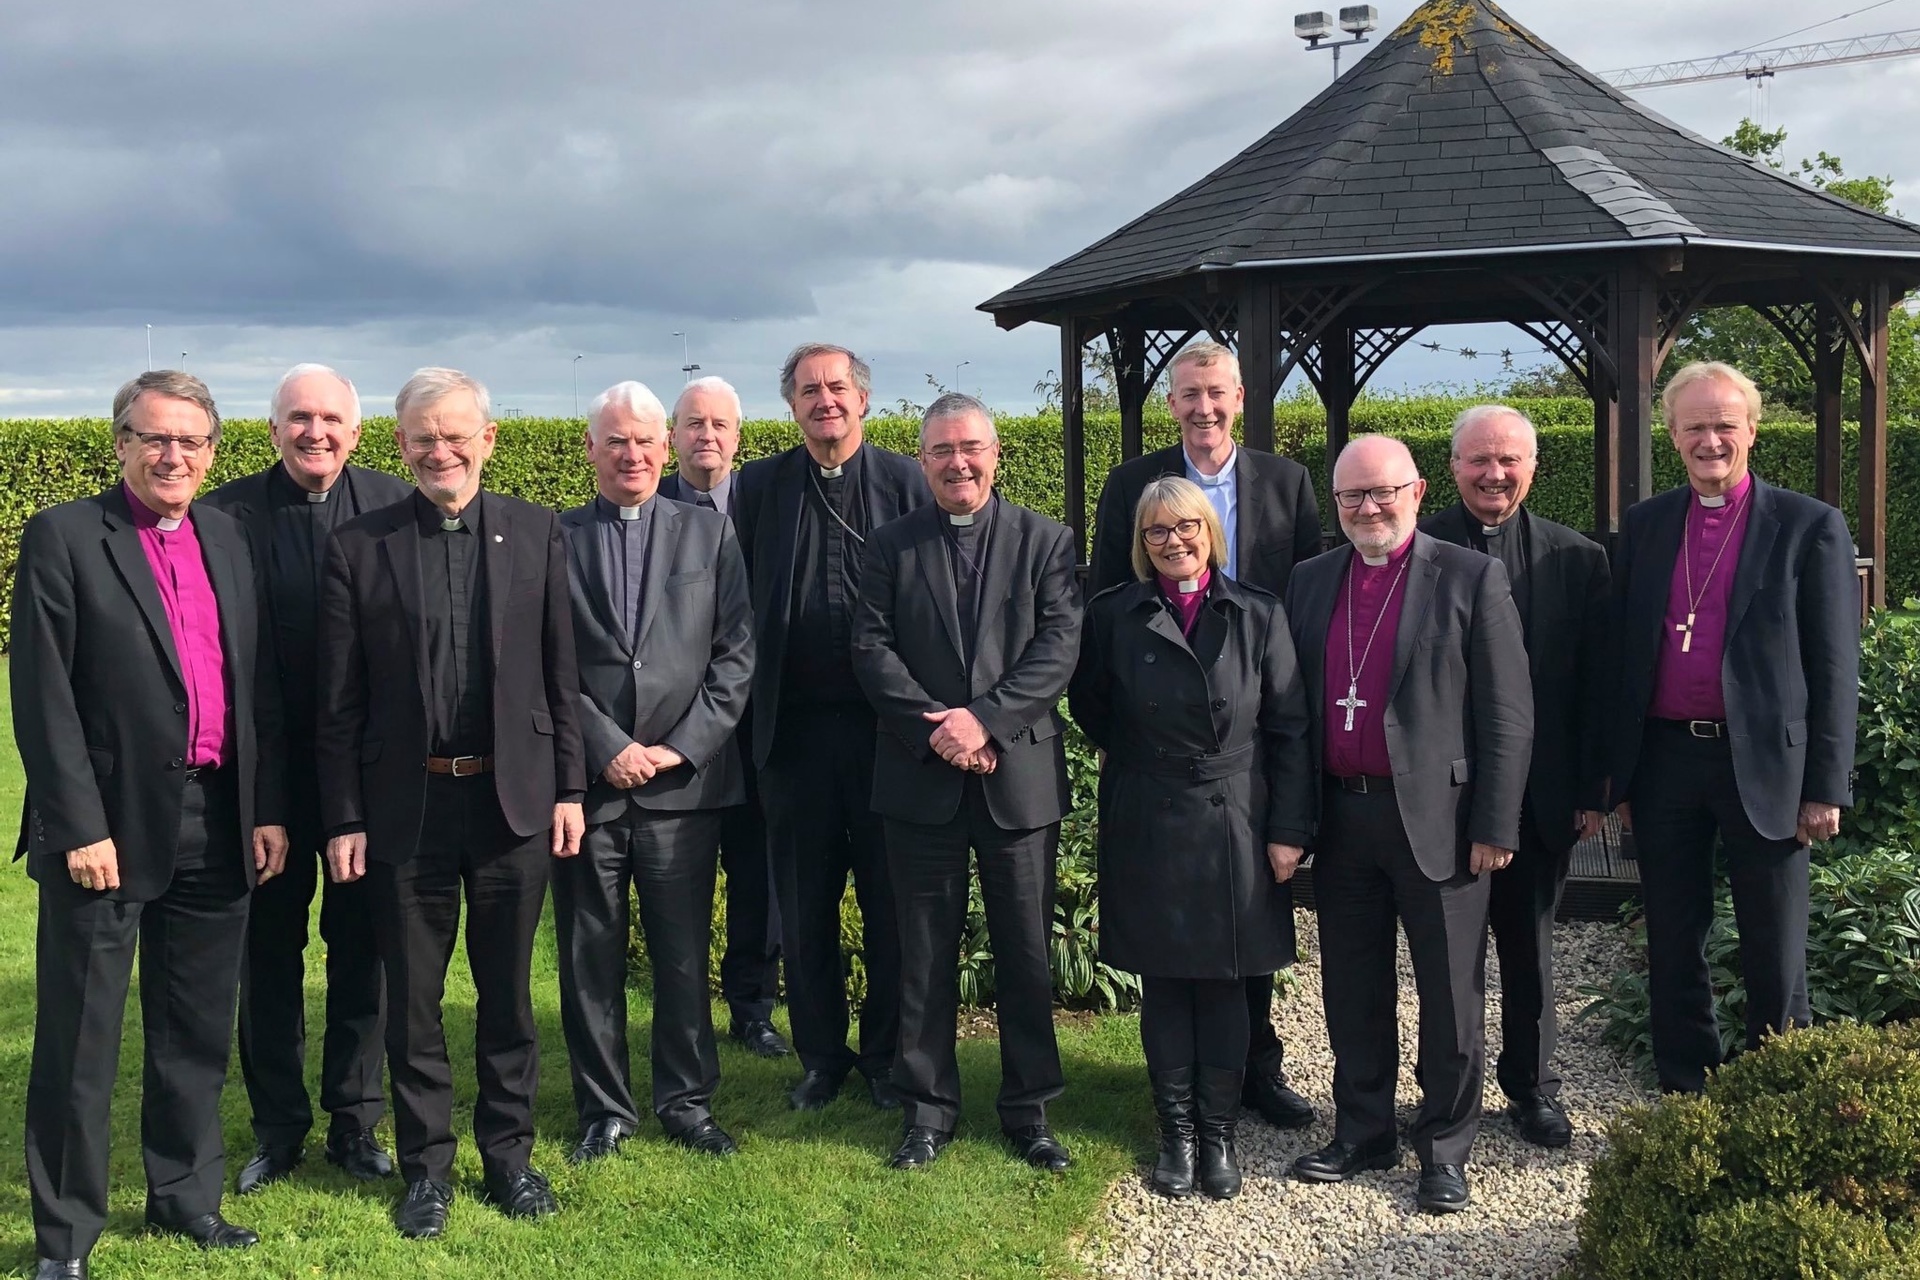 Annual meeting of the Irish Episcopal Conference